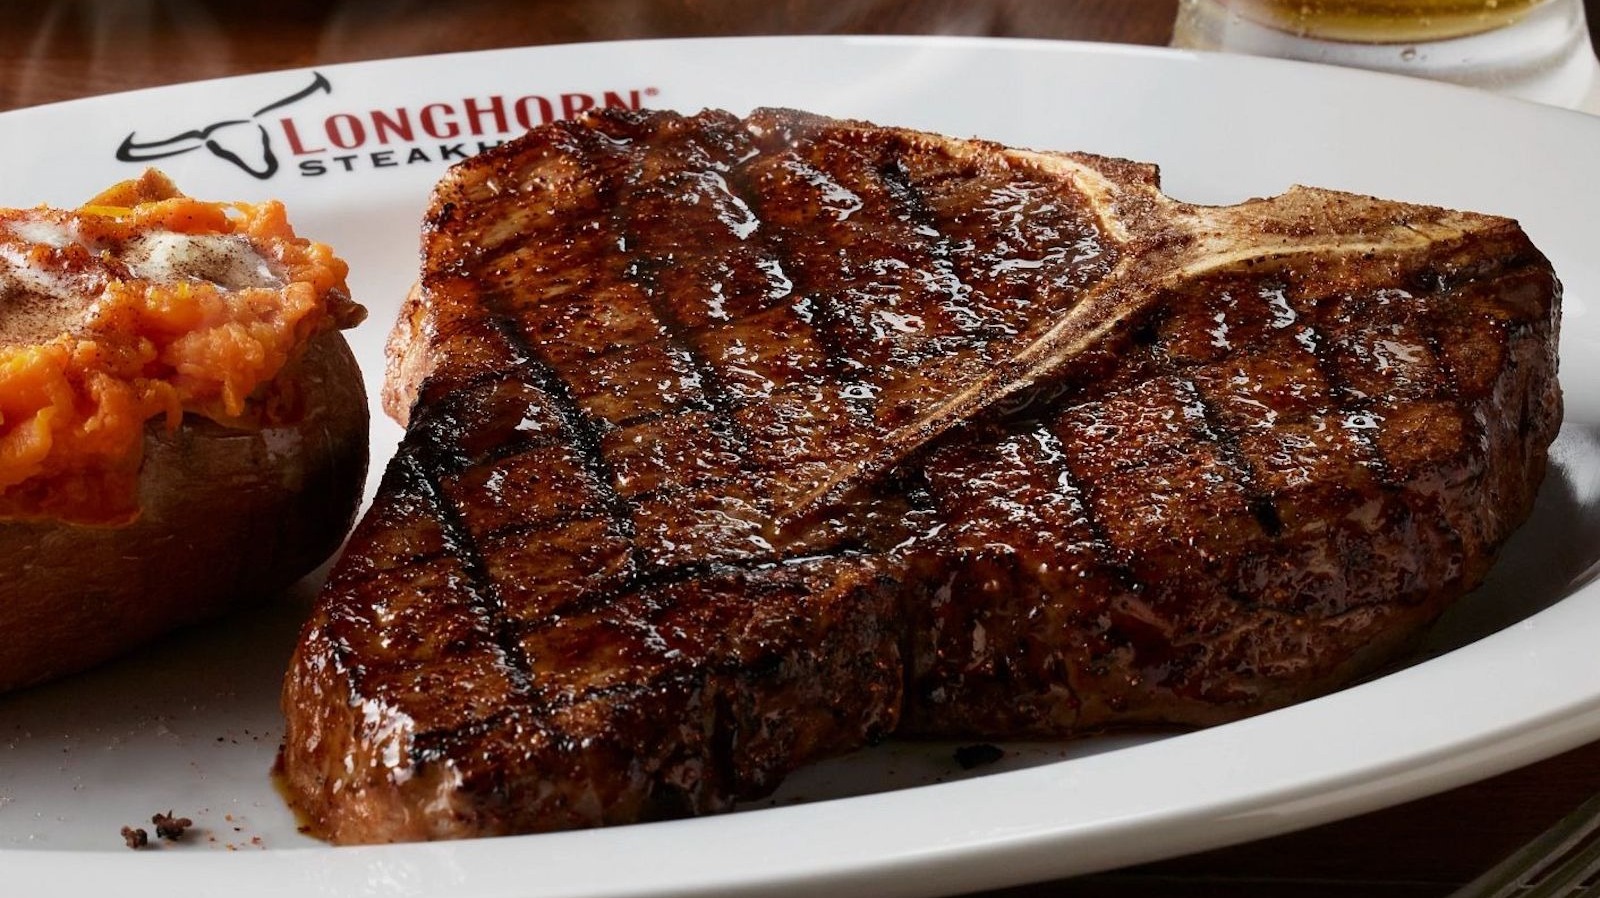 https://www.mashed.com/img/gallery/longhorn-steakhouse-steaks-ranked-from-worst-to-best/l-intro-1667427554.jpg